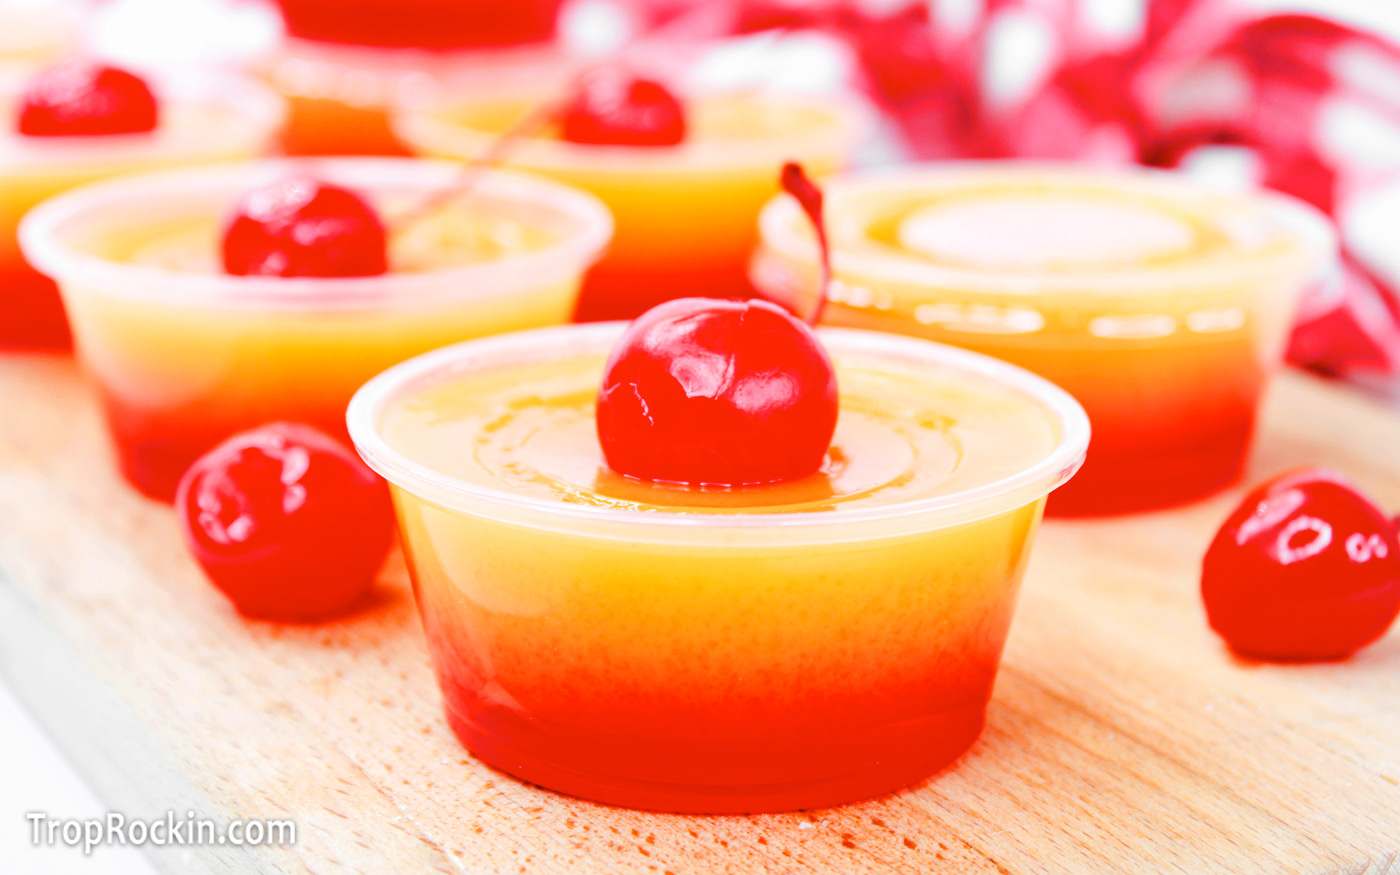 Tequila sunrise jello shots on a wood cutting board. Each jello shot has an orange layer on top and red layer on bottom with a maraschino cherry sitting on top.